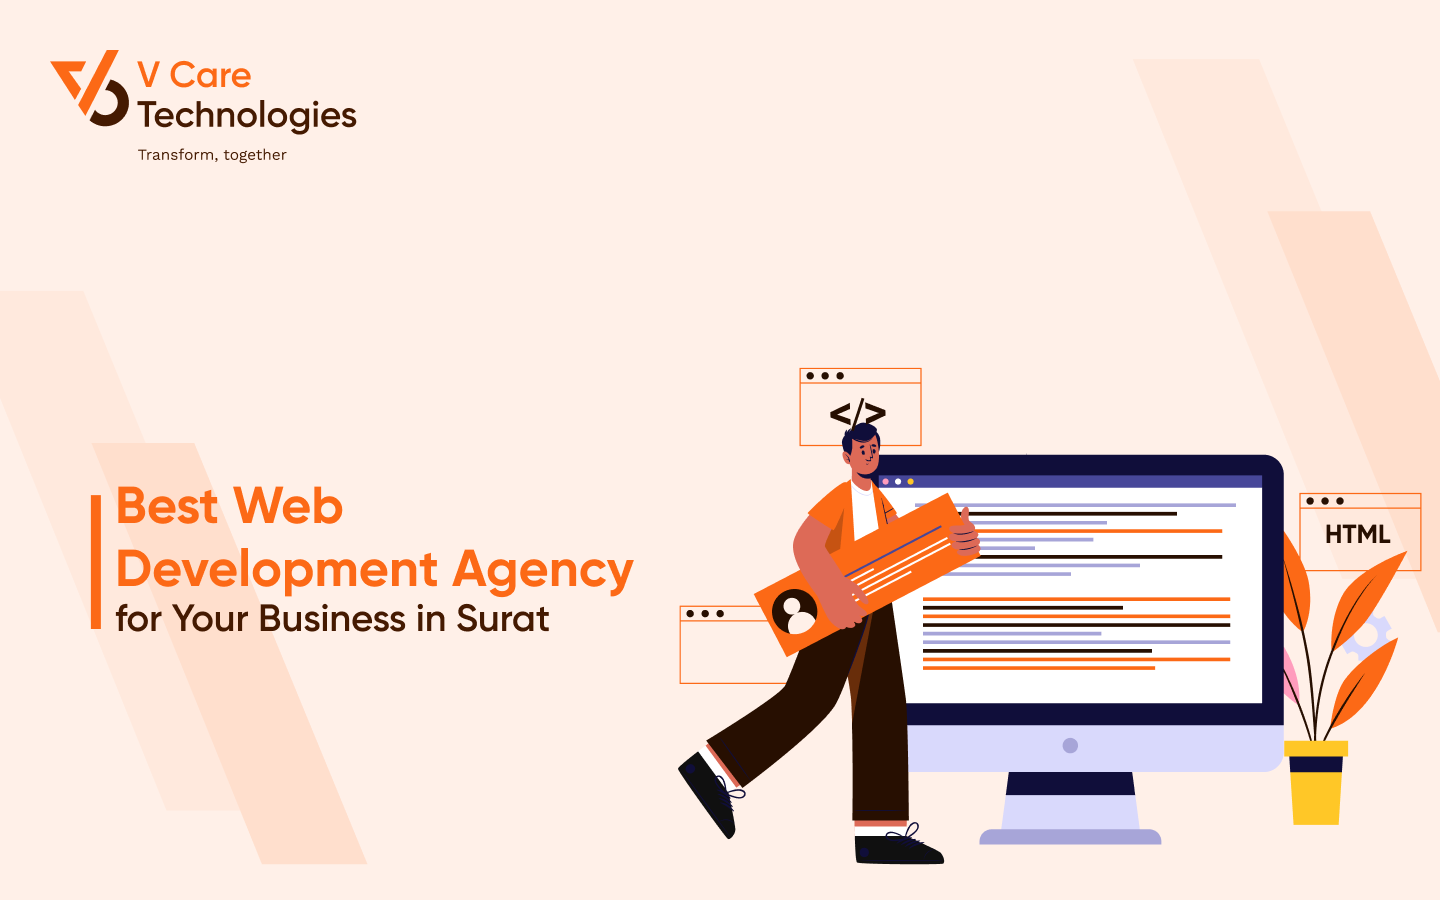 Best Web Development Agency for Your Business in Surat